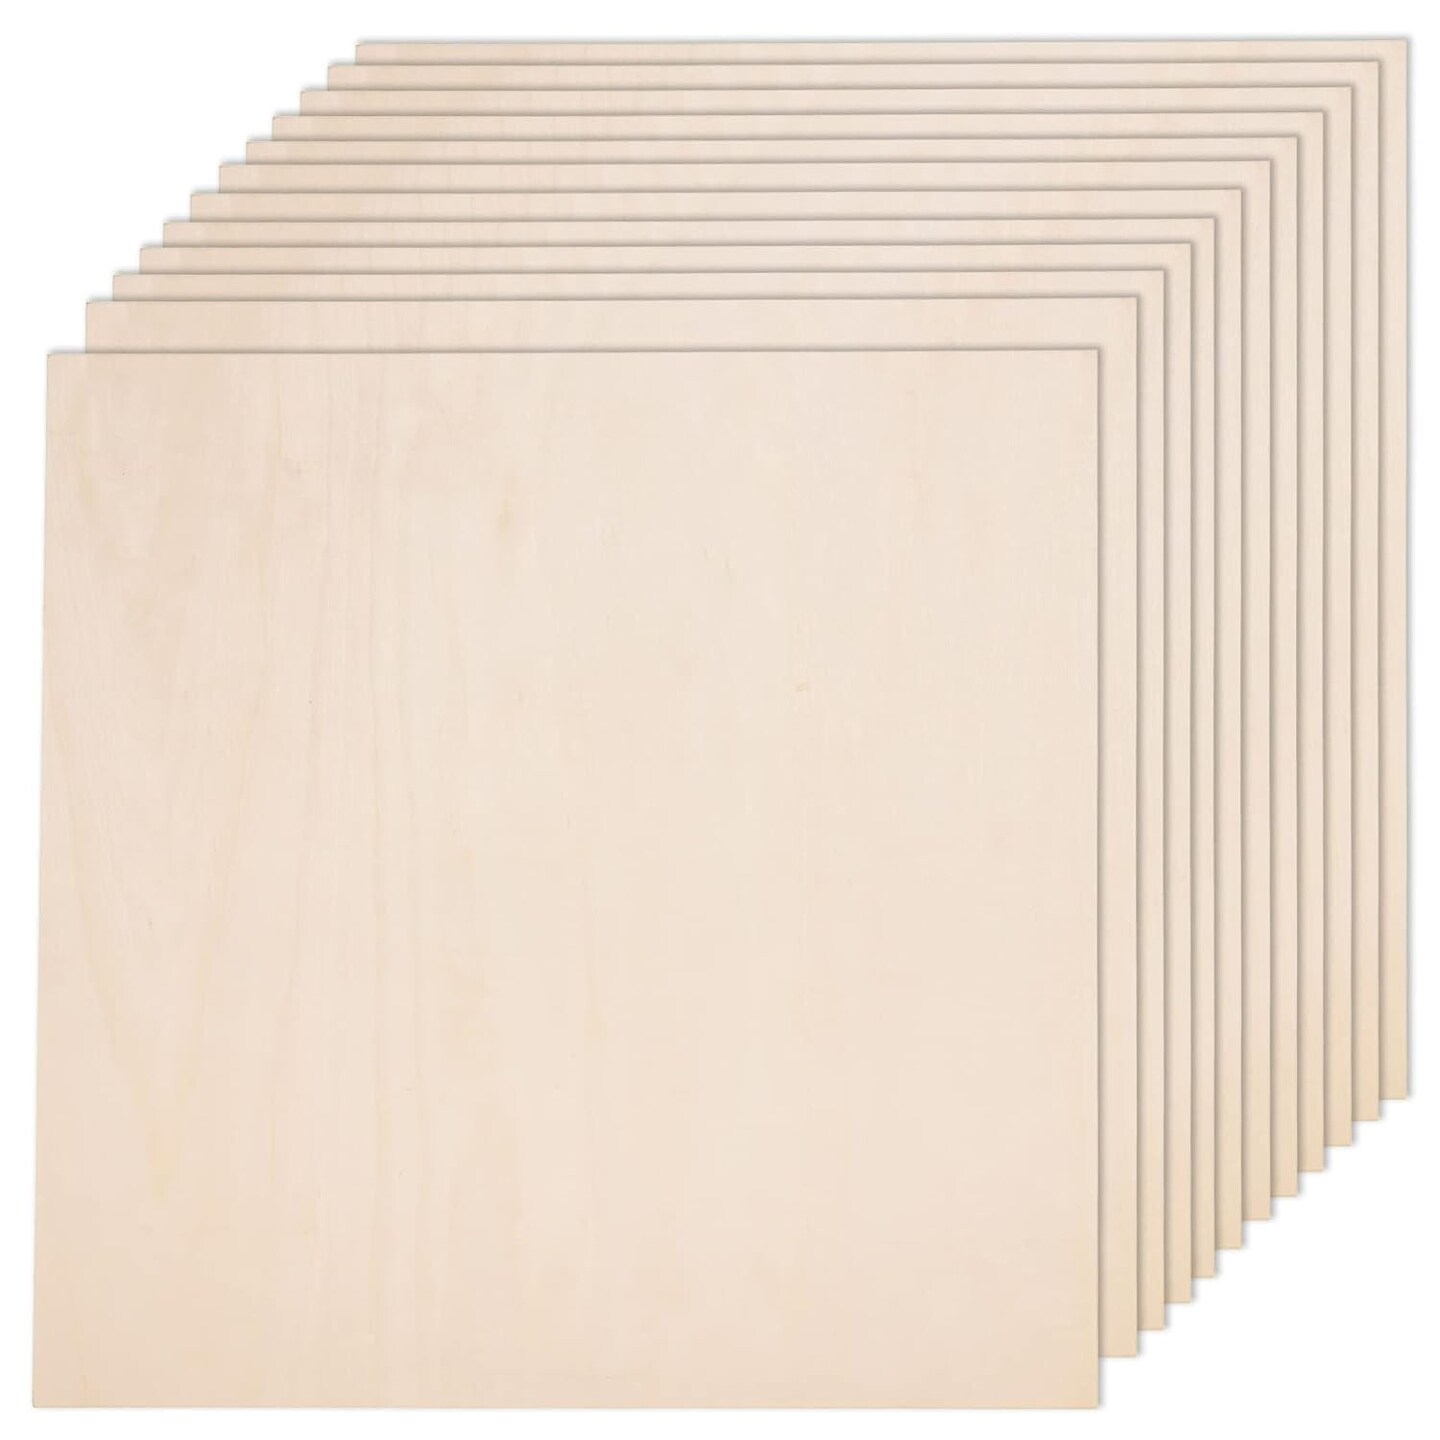 12 Pack Basswood Sheets For Crafts-12 X 12 X 1/8 Inch- 3Mm Thick Plywood Sheets With Smooth Surfaces-Unfinished Squares Wood Boards For Laser Cutting, Wood Burning, Architectural Models, Staining